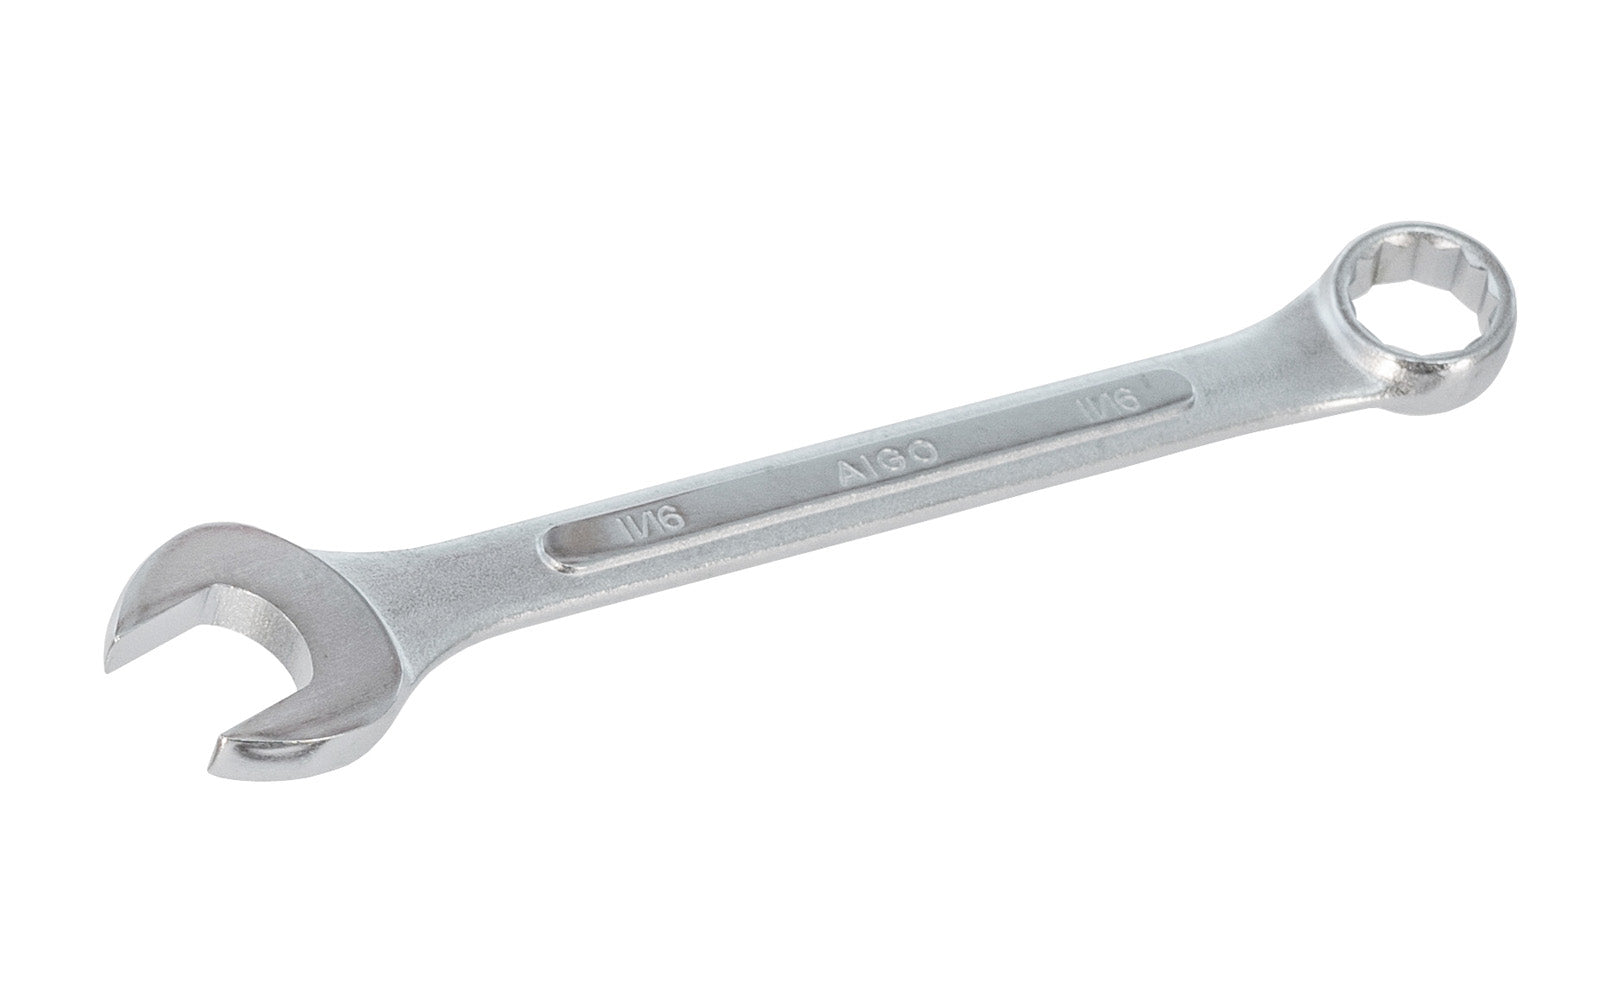 11/16" Japanese AIGO Combo Wrench - Forged Alloy Steel. 12 PT. 12 Point. Made in Japan.